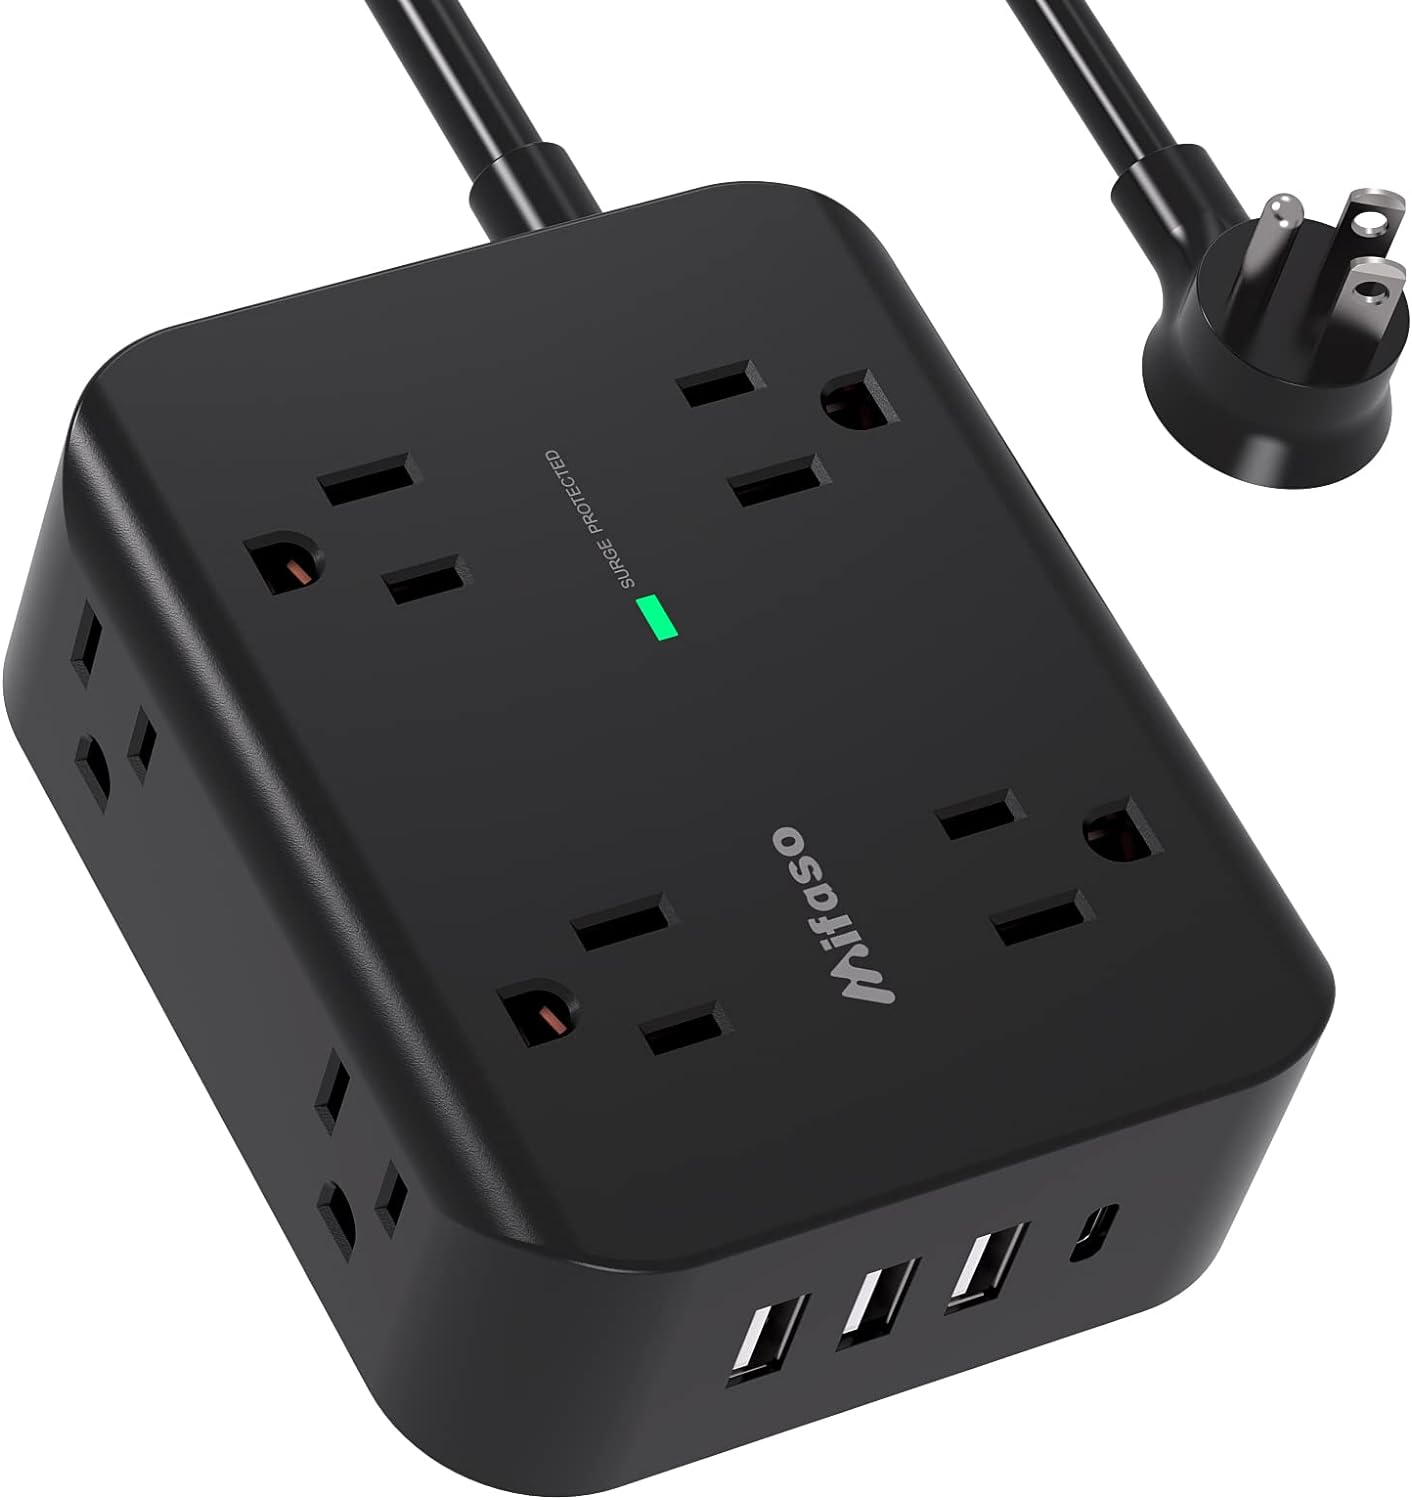 Power Strip Surge Protector - Flat Plug, Wall Mount, 8 Wide Outlets with 4 USB Ports (1 USB C), 5FT Heavy Duty Extension Cord with Multiple Outlets, Charging Station Overload Protection for Home Dorm